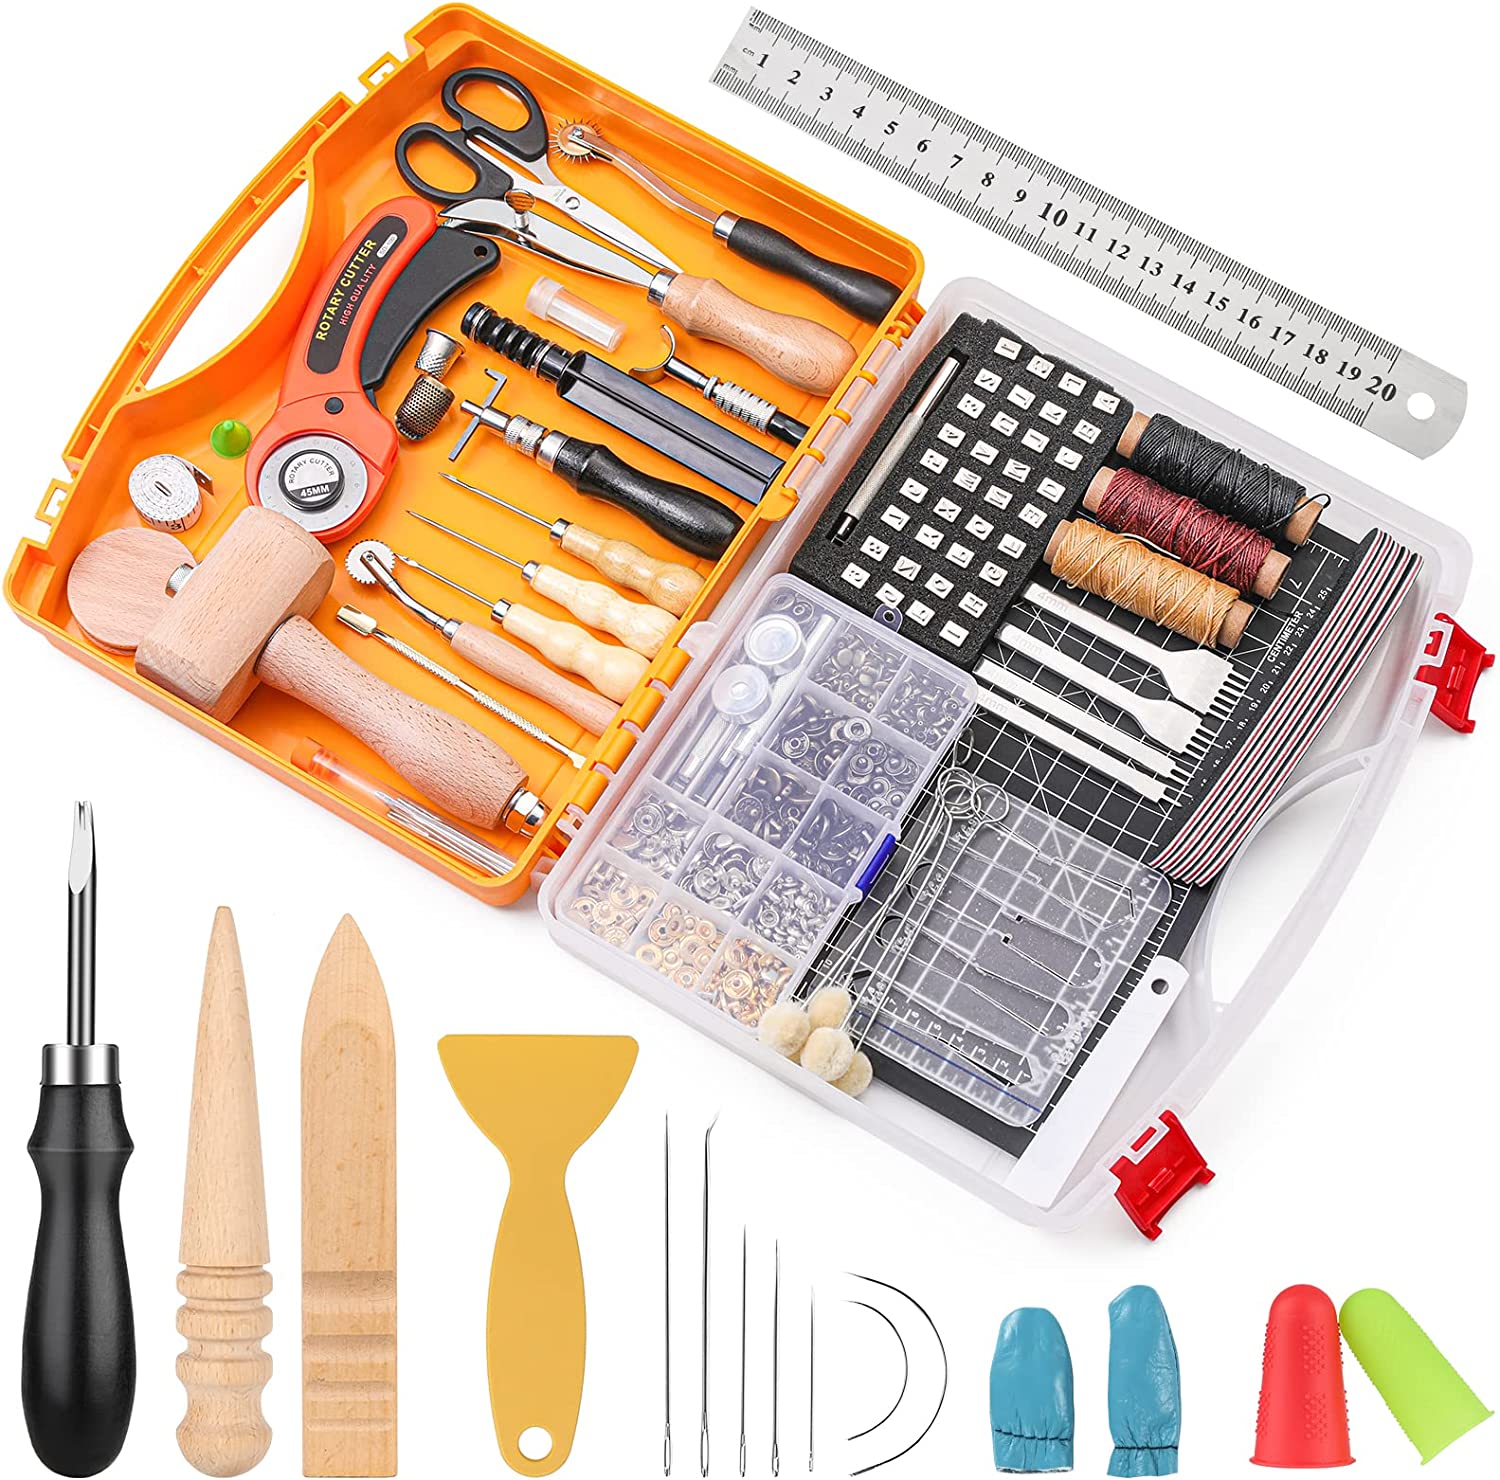 183Pcs Leather kit,Leathercraft Working Tool Kit with Saddle Making Tools  Set,Leather Rivets Kit,Prong Punch,Leather Hammer for Leather Working,Leather  Making,Leather Craft DIY